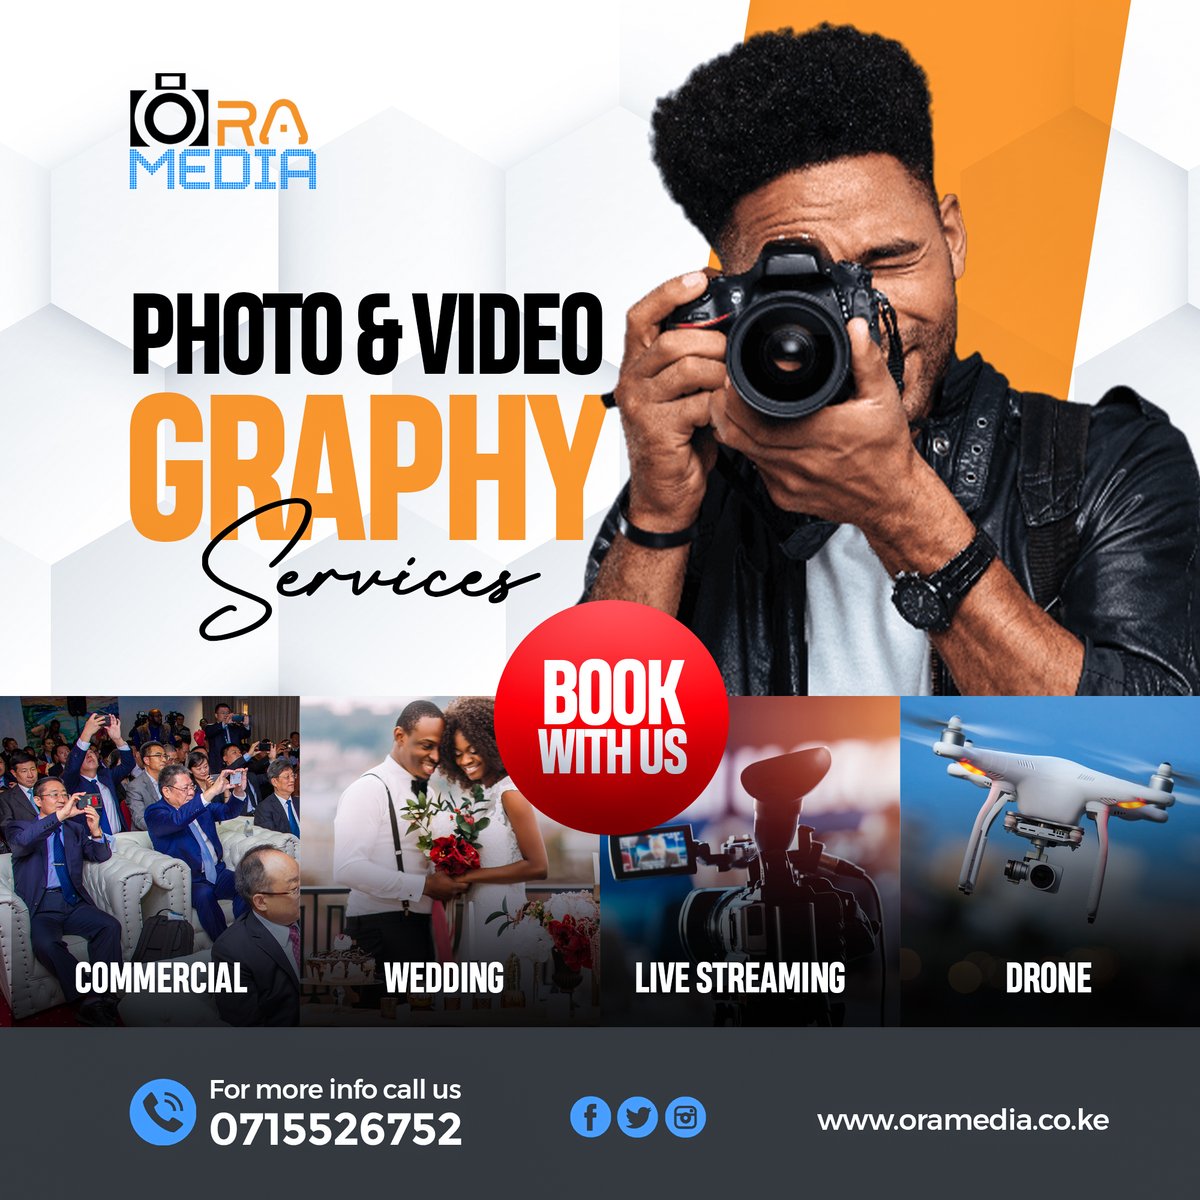 oramedia.co.ke showcases From family photoshoots to corporate events, we offer a range of services to cater to all your photography needs. 
#PhotographyByOramedia  #photographyservices  #videoservices #OracomGroup
Monica Kimani Kenya Power rebecca miano #MrBeast